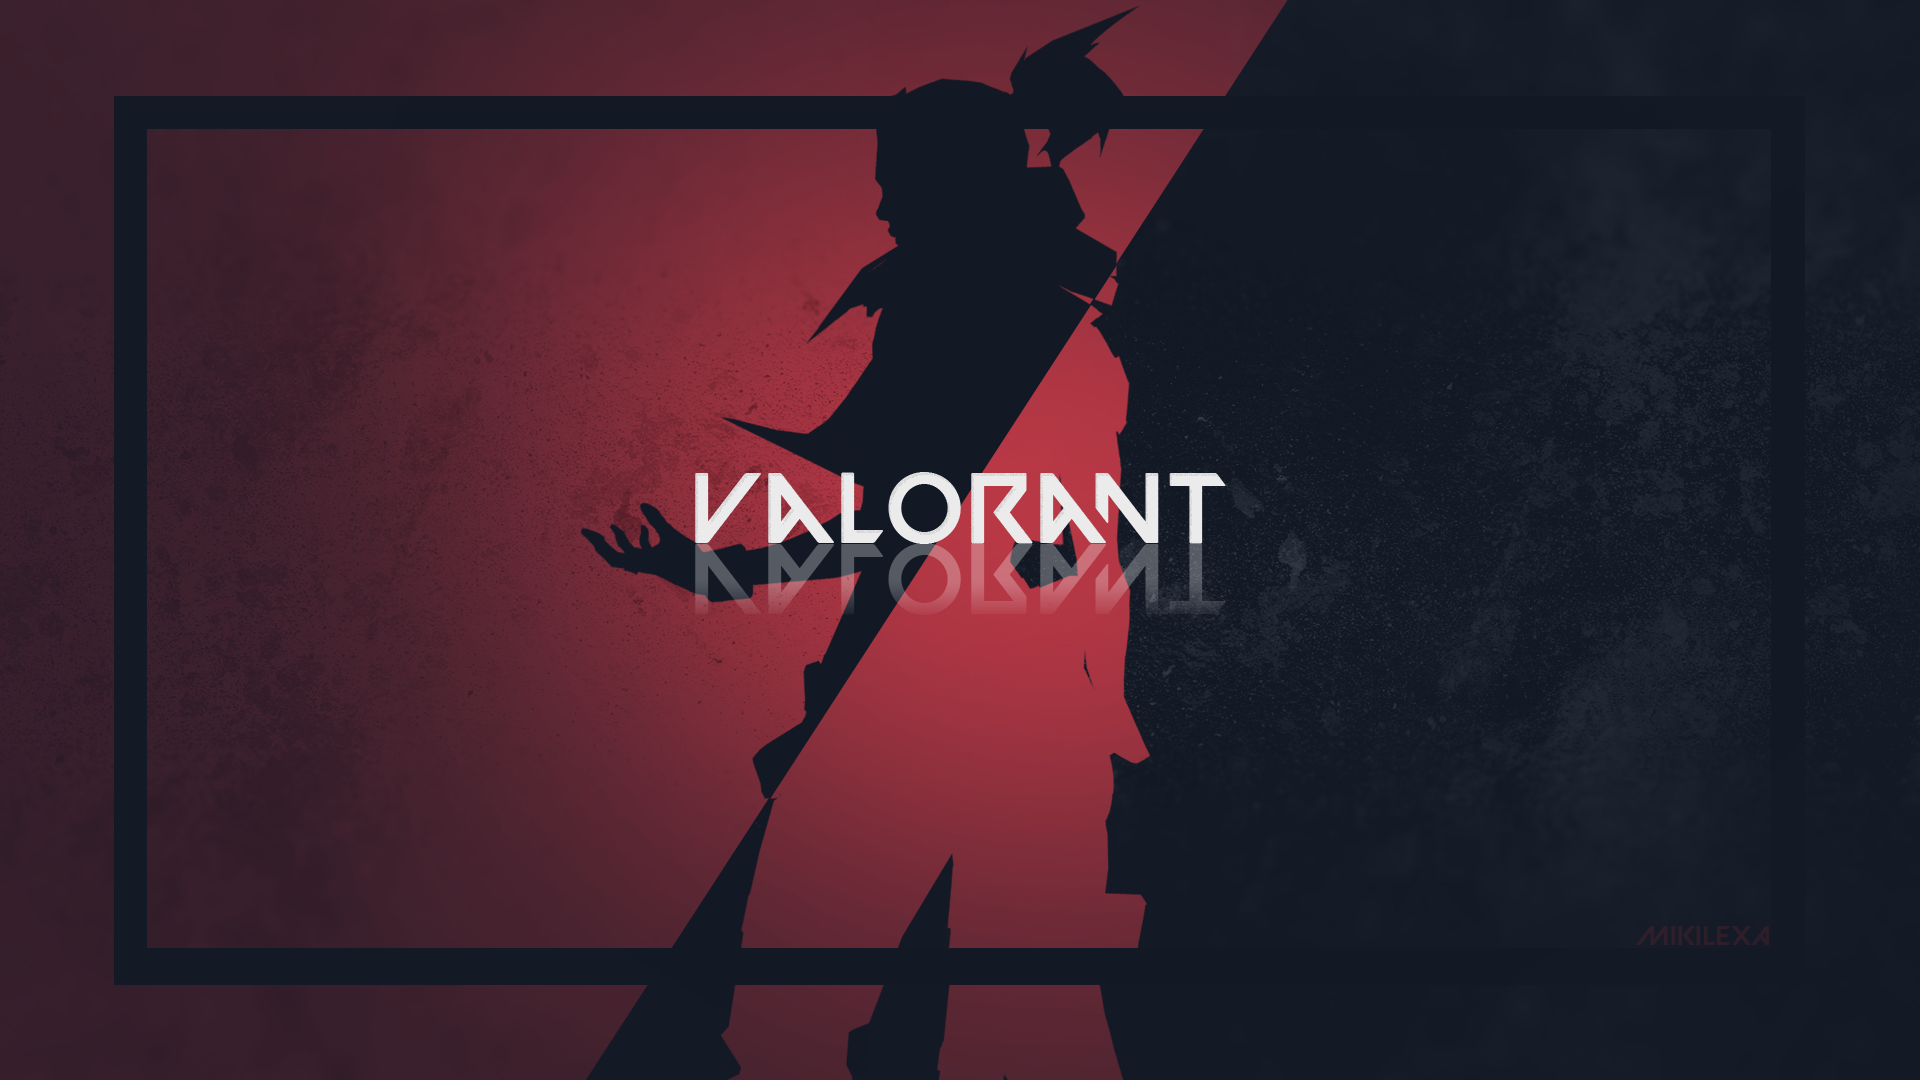 made this minimalistic valorant wallpaper, what do u think?